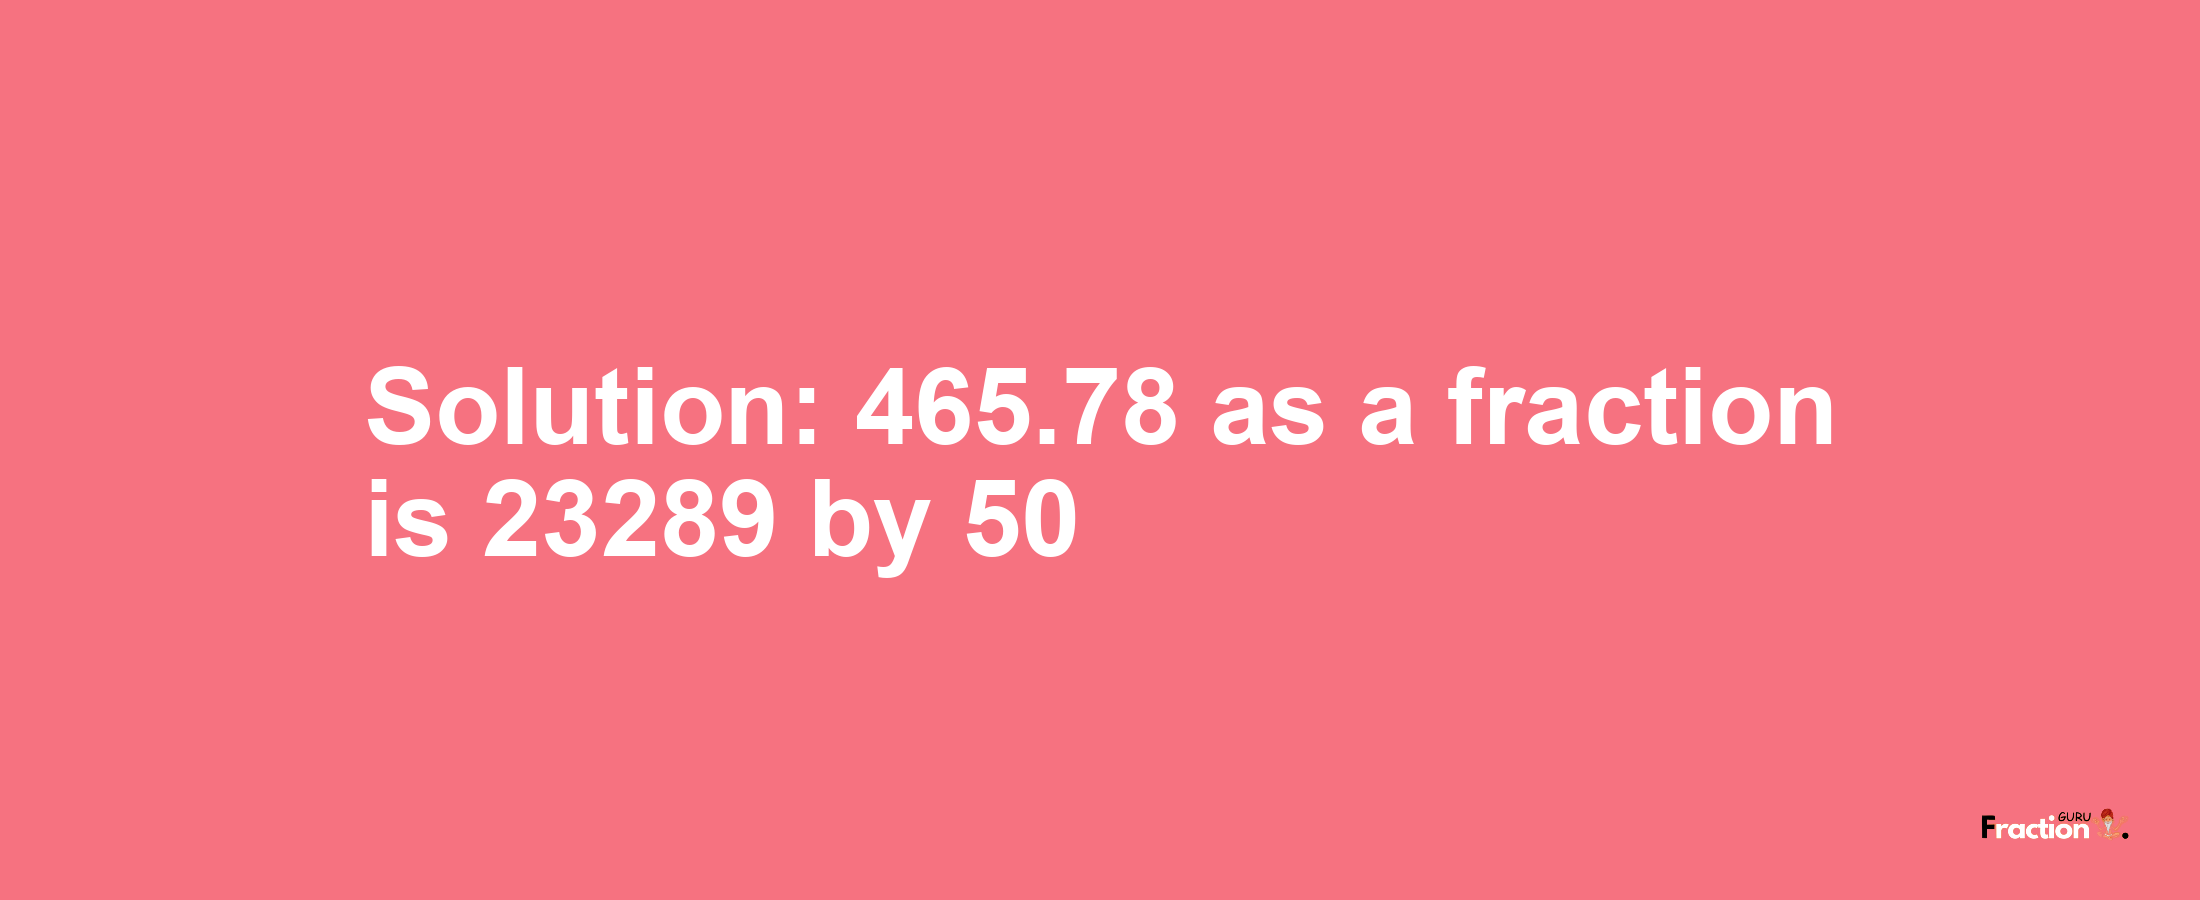 Solution:465.78 as a fraction is 23289/50